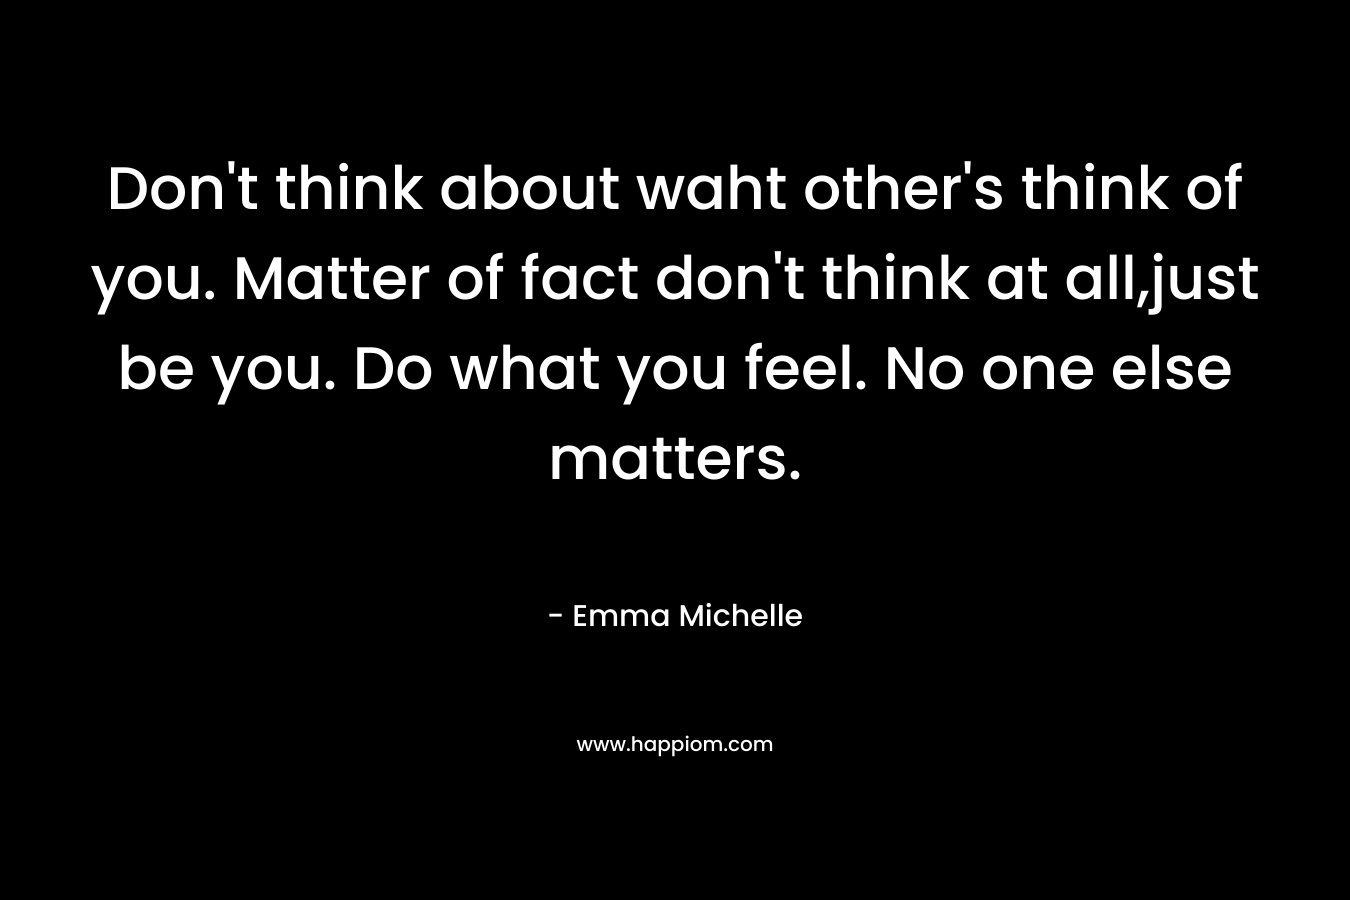 Don't think about waht other's think of you. Matter of fact don't think at all,just be you. Do what you feel. No one else matters.